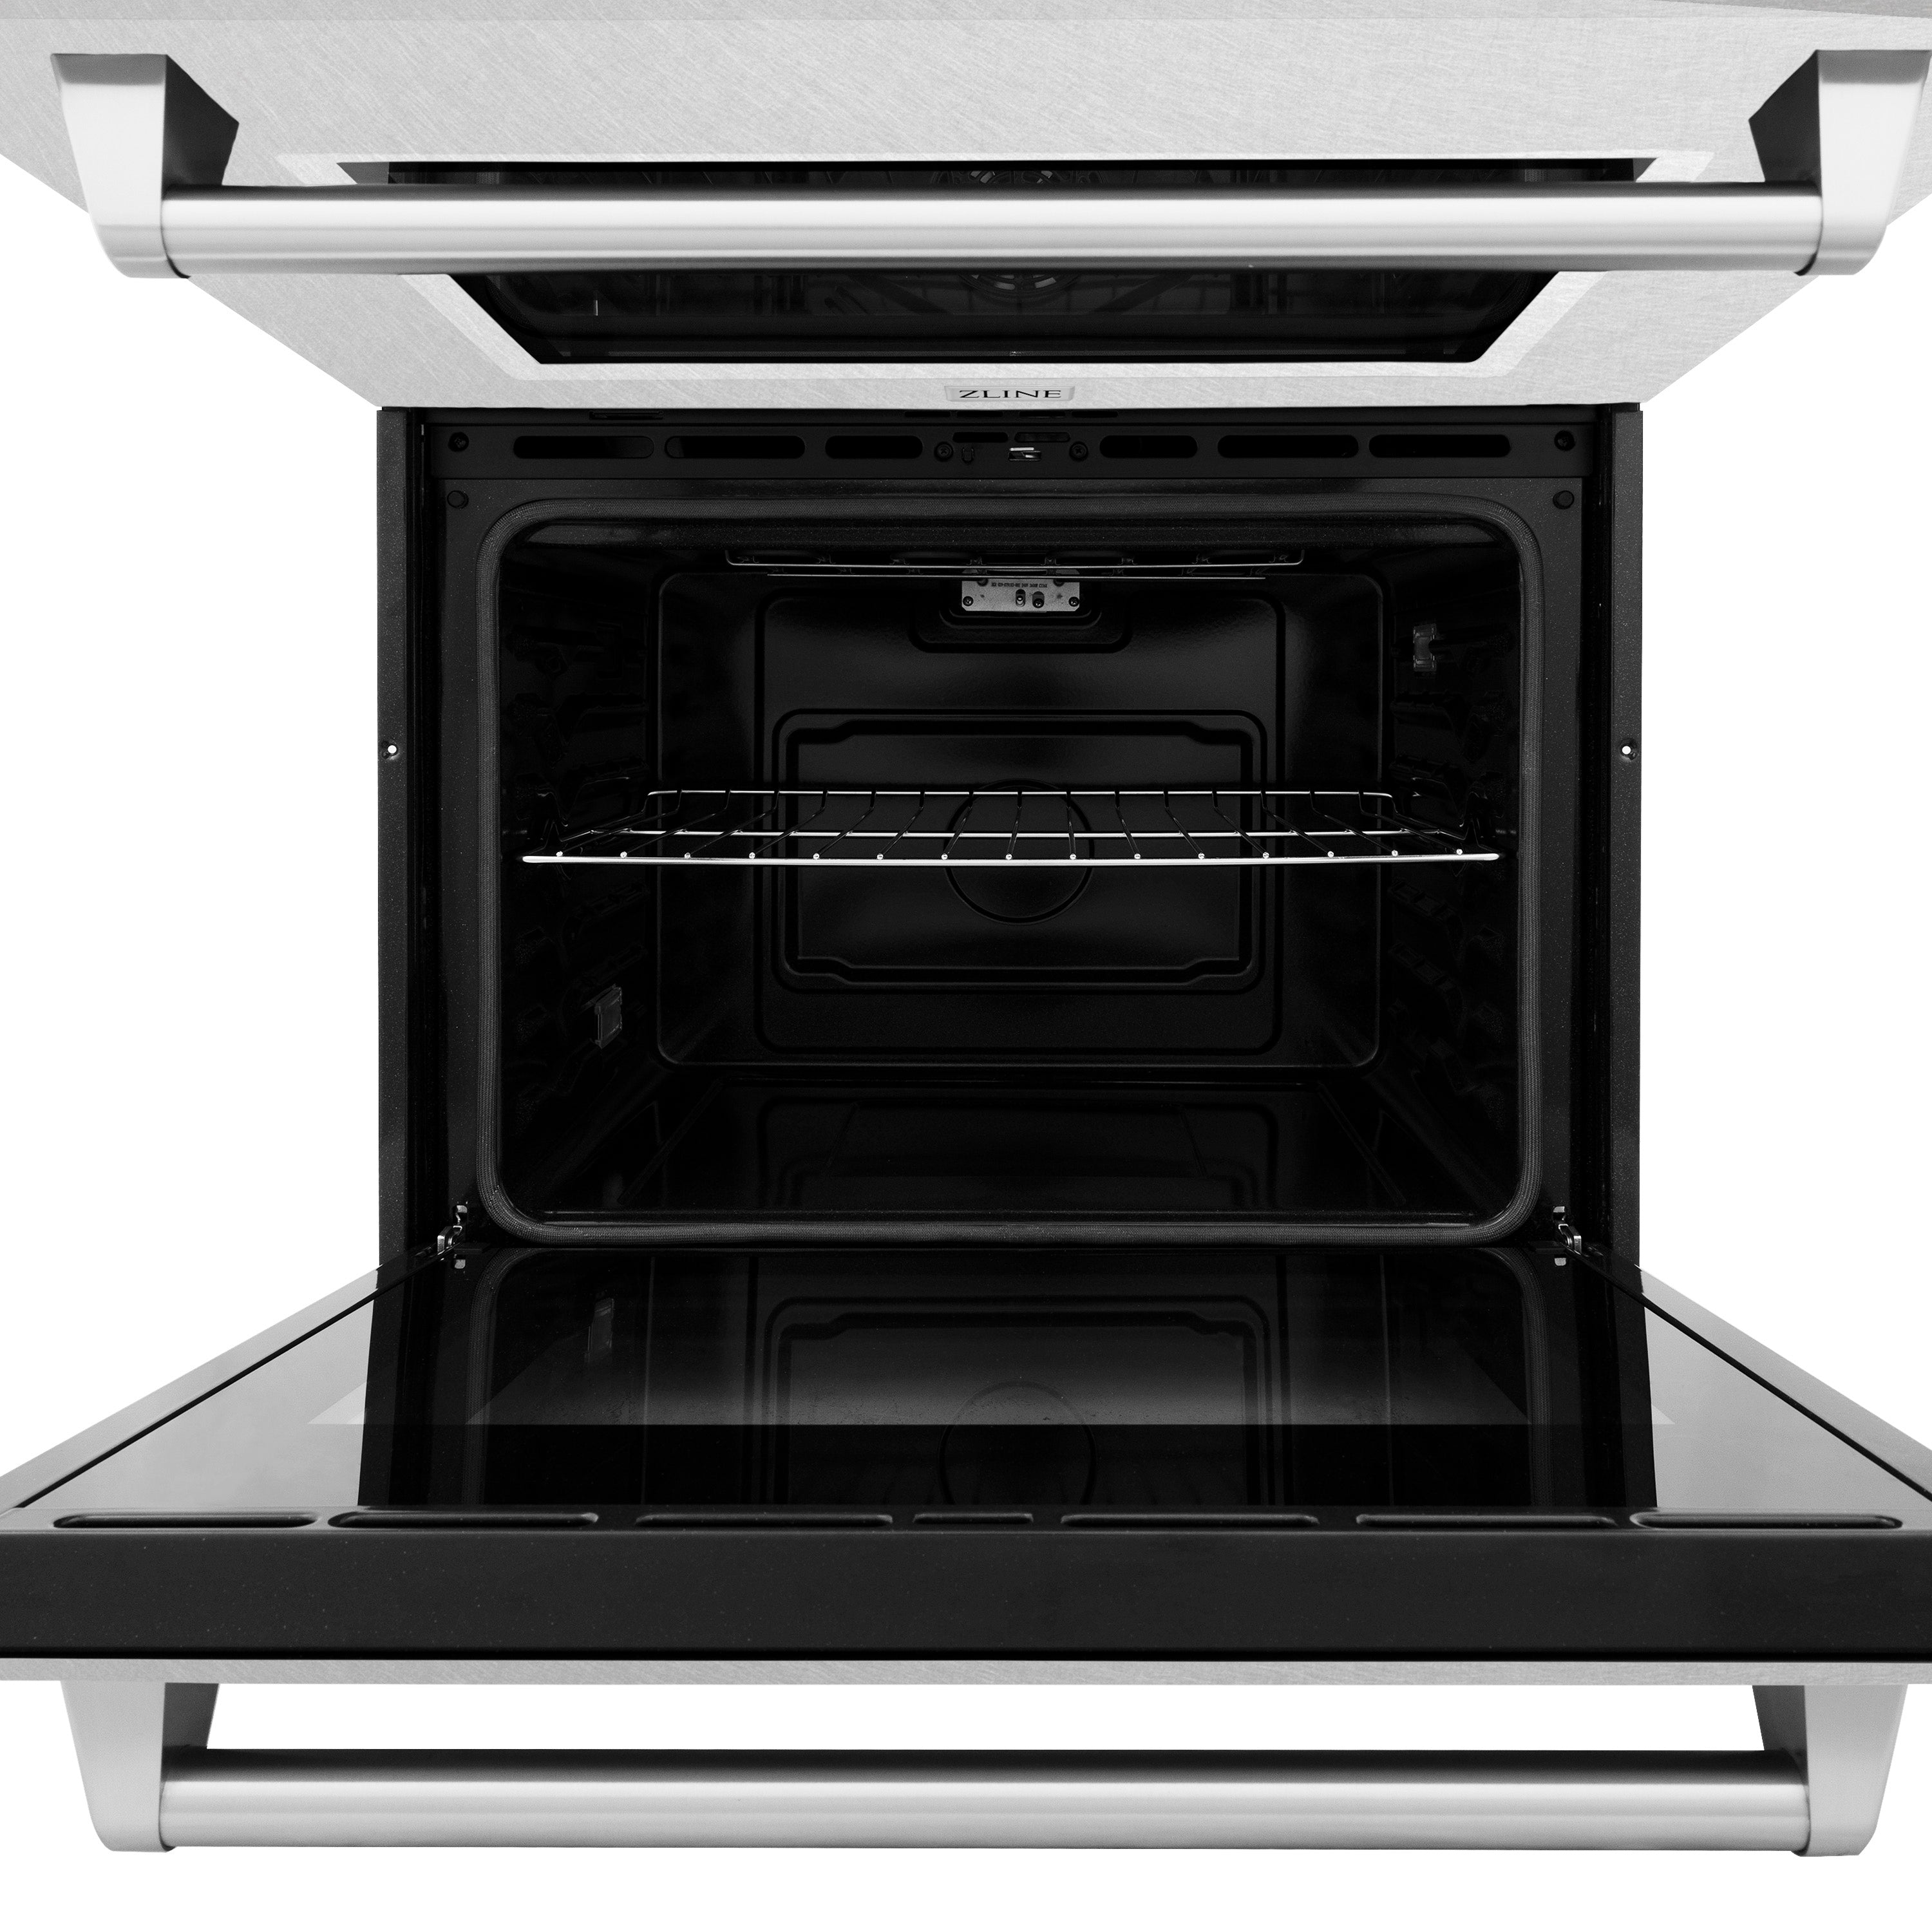 ZLINE 30" Professional Double Wall Oven with Self Clean and True Convection in Fingerprint Resistant Stainless Steel (AWDS-30)